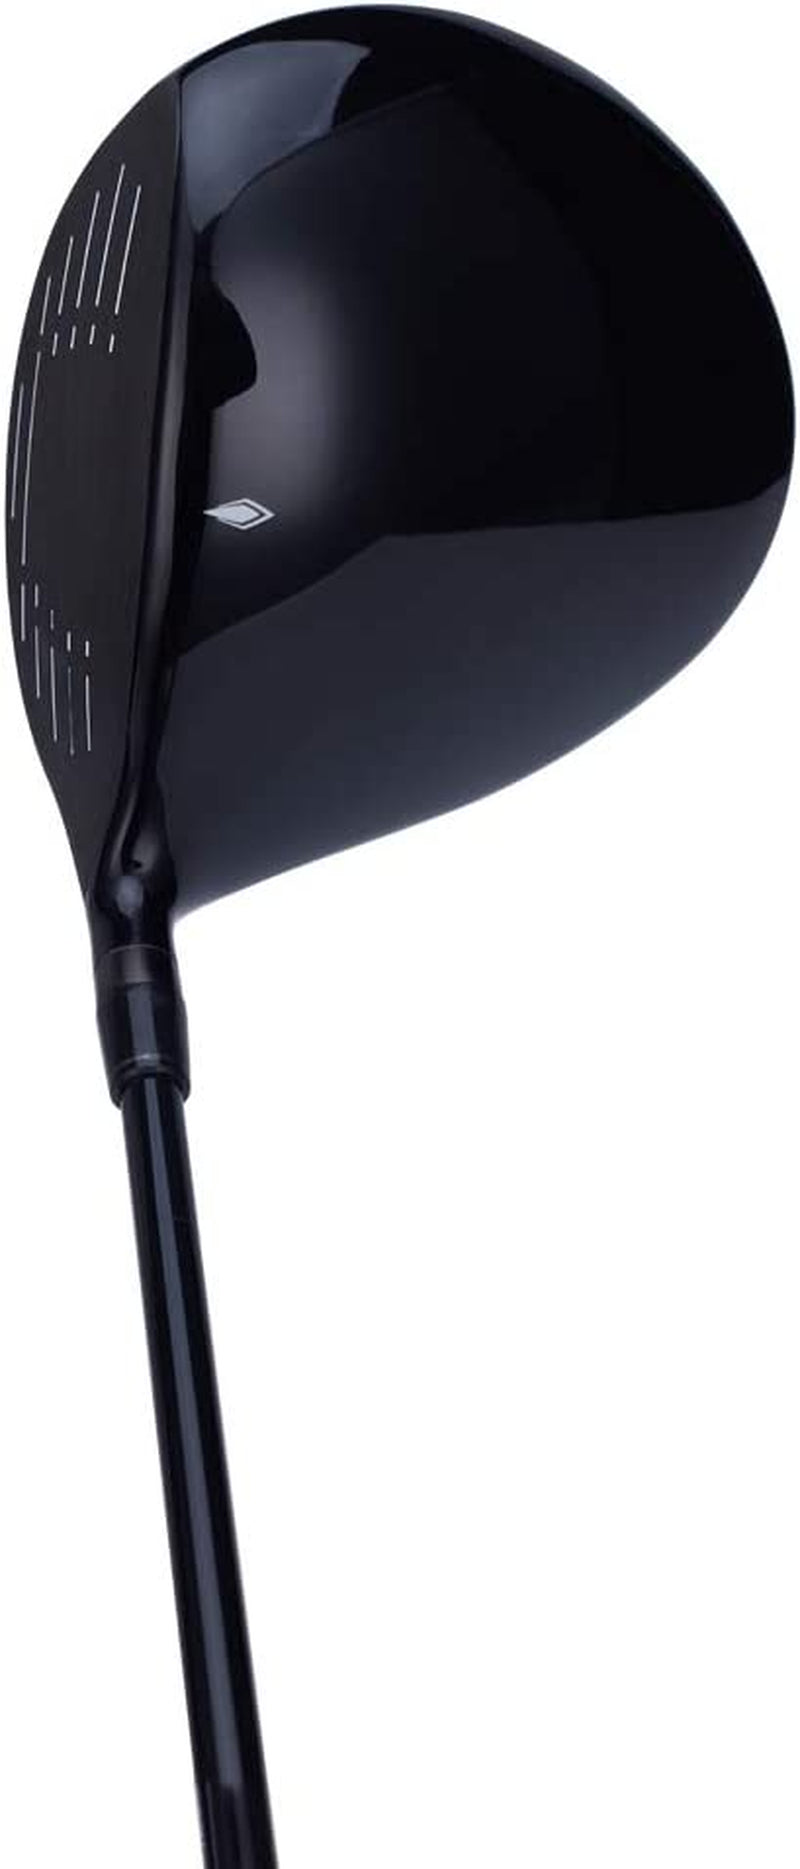 Titanium Golf Driver for Men,Driver Golf Clubs with Driver Covers Right Handed,460Cc